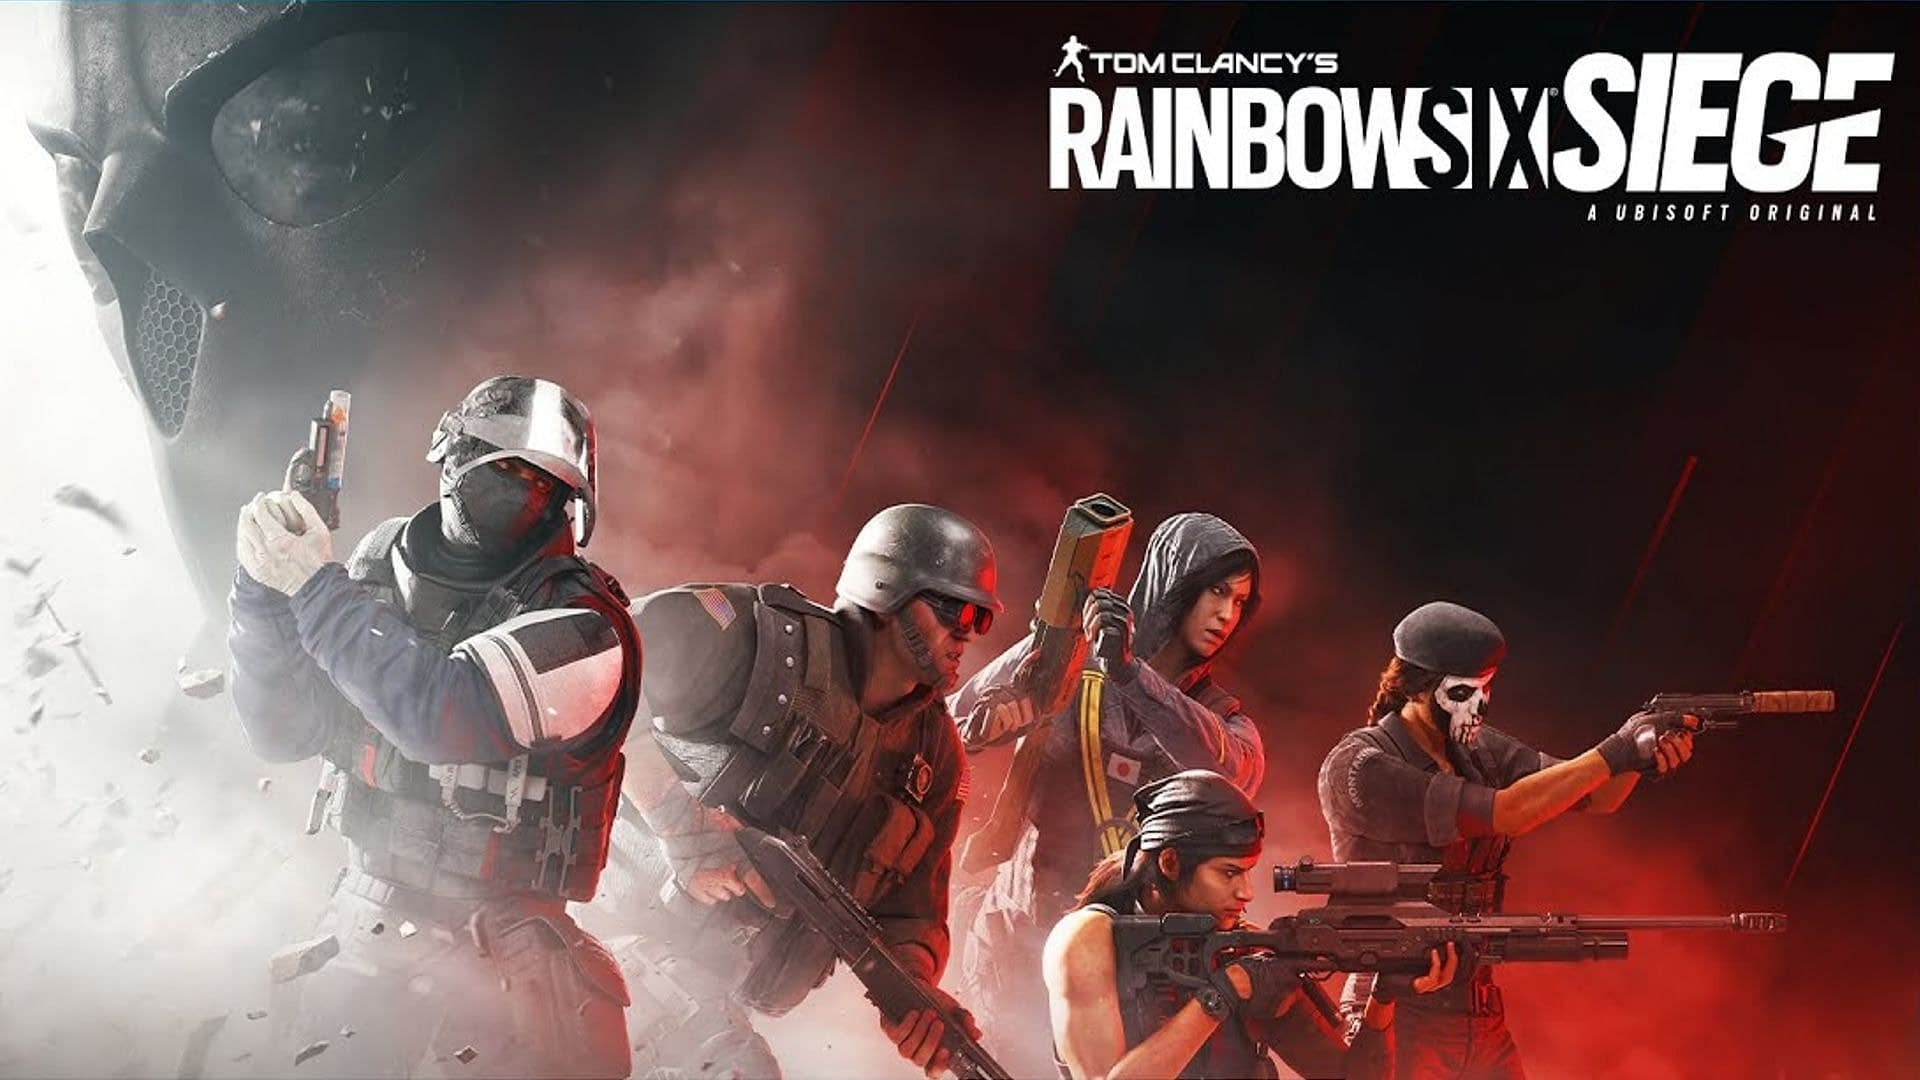 Rainbow Six Siege Director: The game can be played forever!